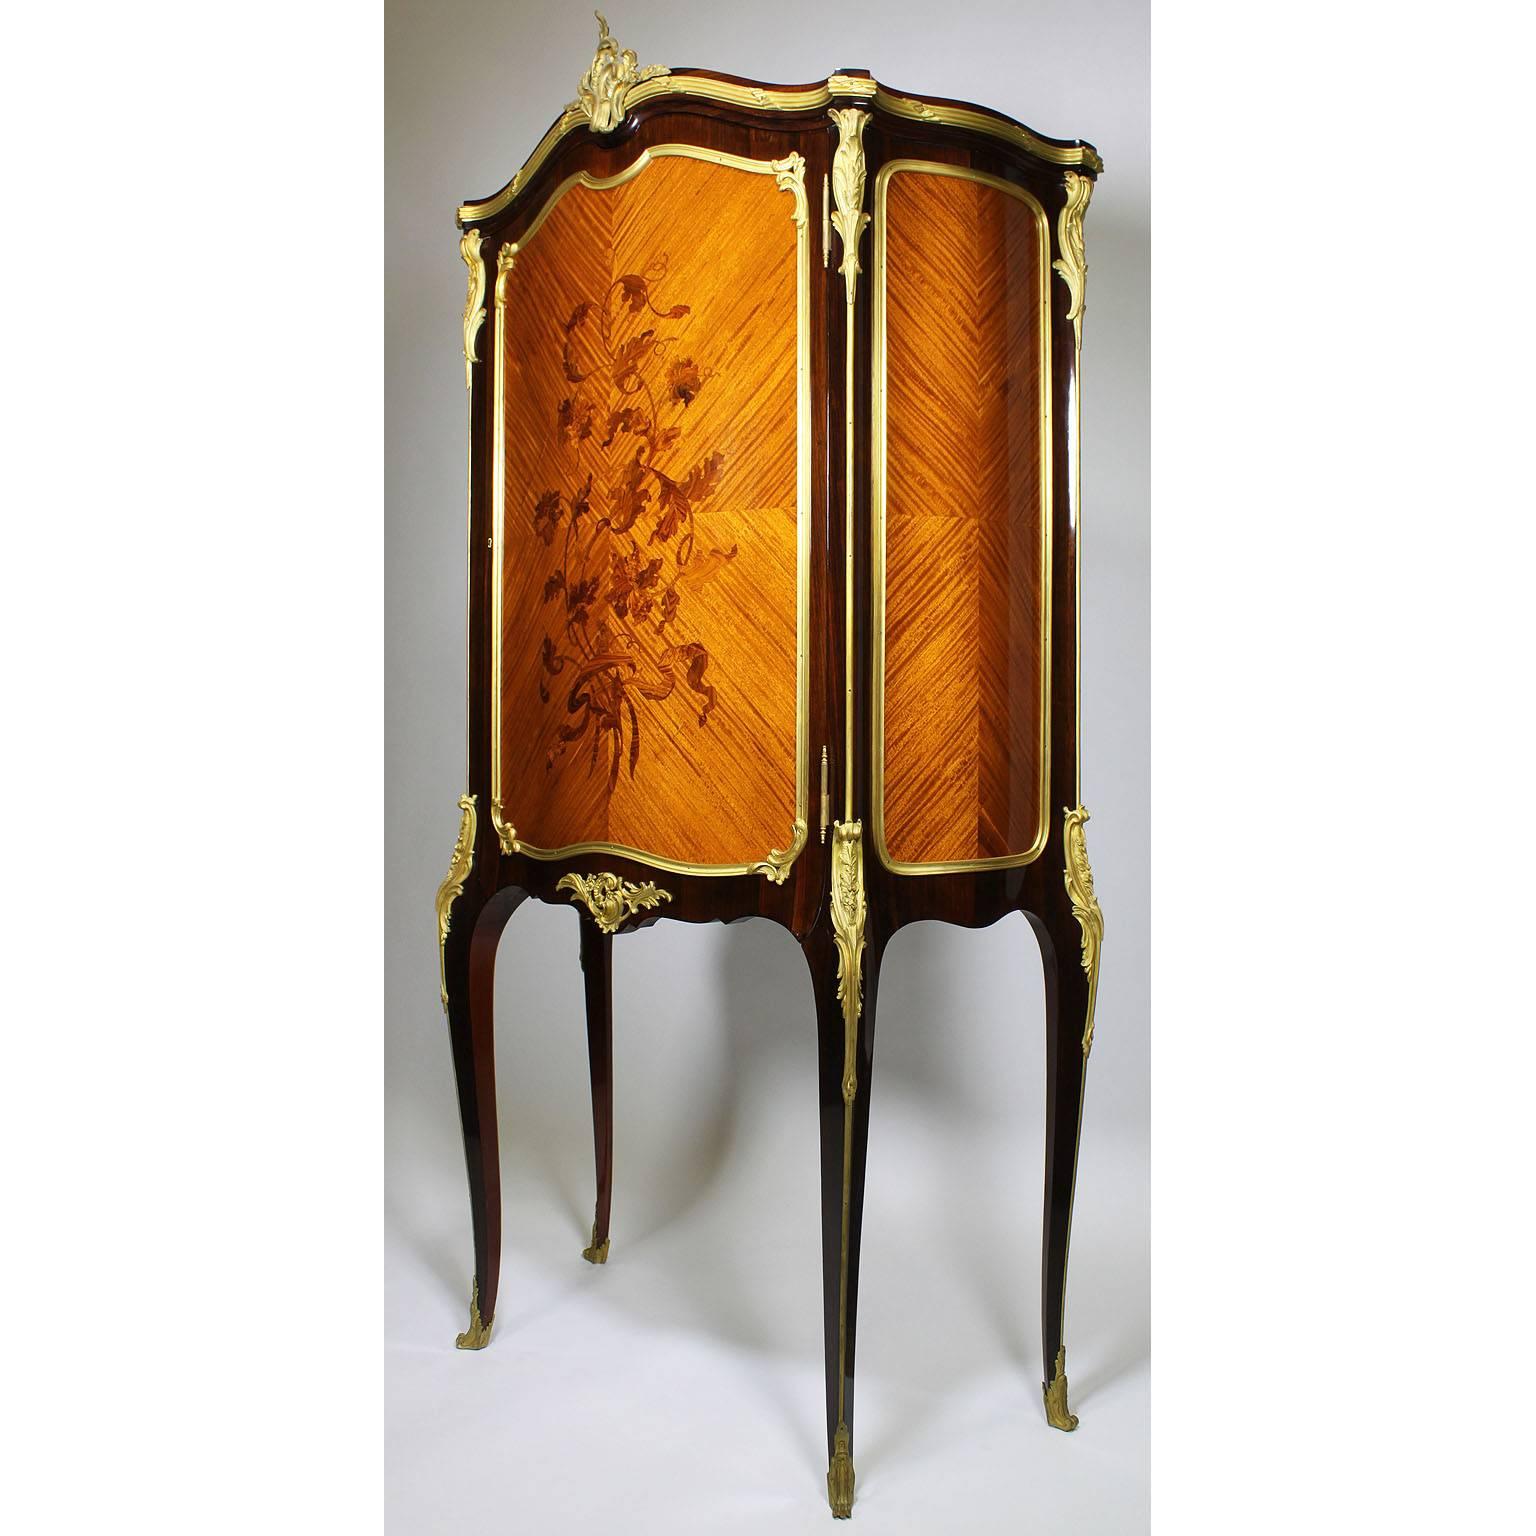 A fine French 19th-20th century Louis XV Style gilt bronze-mounted, Mahogany and Tulipwood Marquetry Side Cabinet/Secretaire in the style of François Linke (1855-1946). The slender serpentine mahogany body with a single paneled front door with a